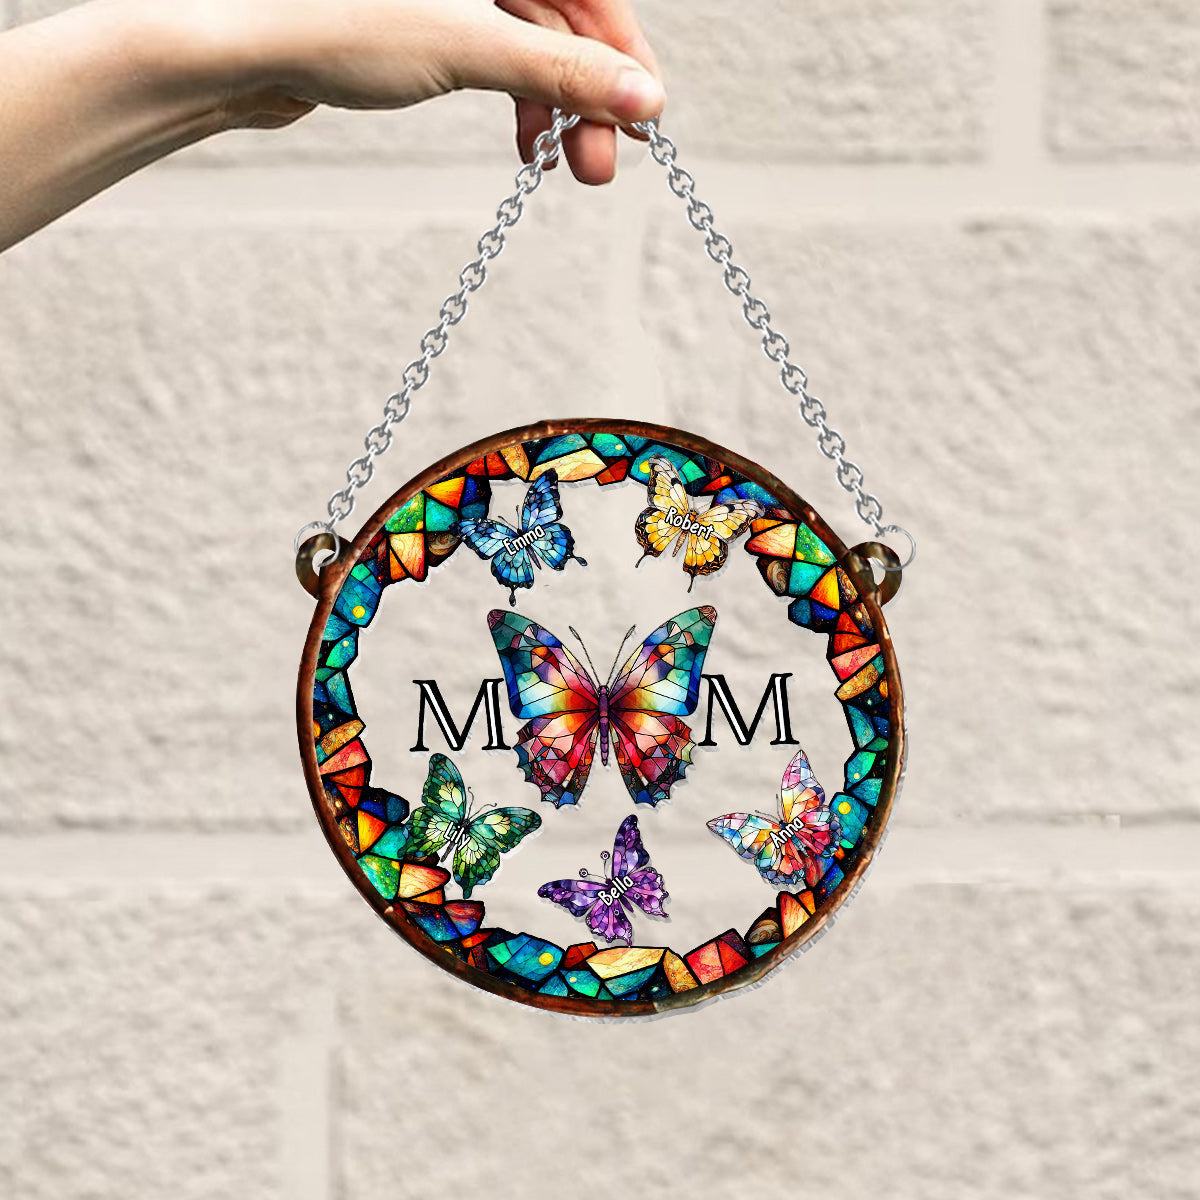 Butterfly Stainglass Mother - Personalized Mother Window Hanging Suncatcher Ornament